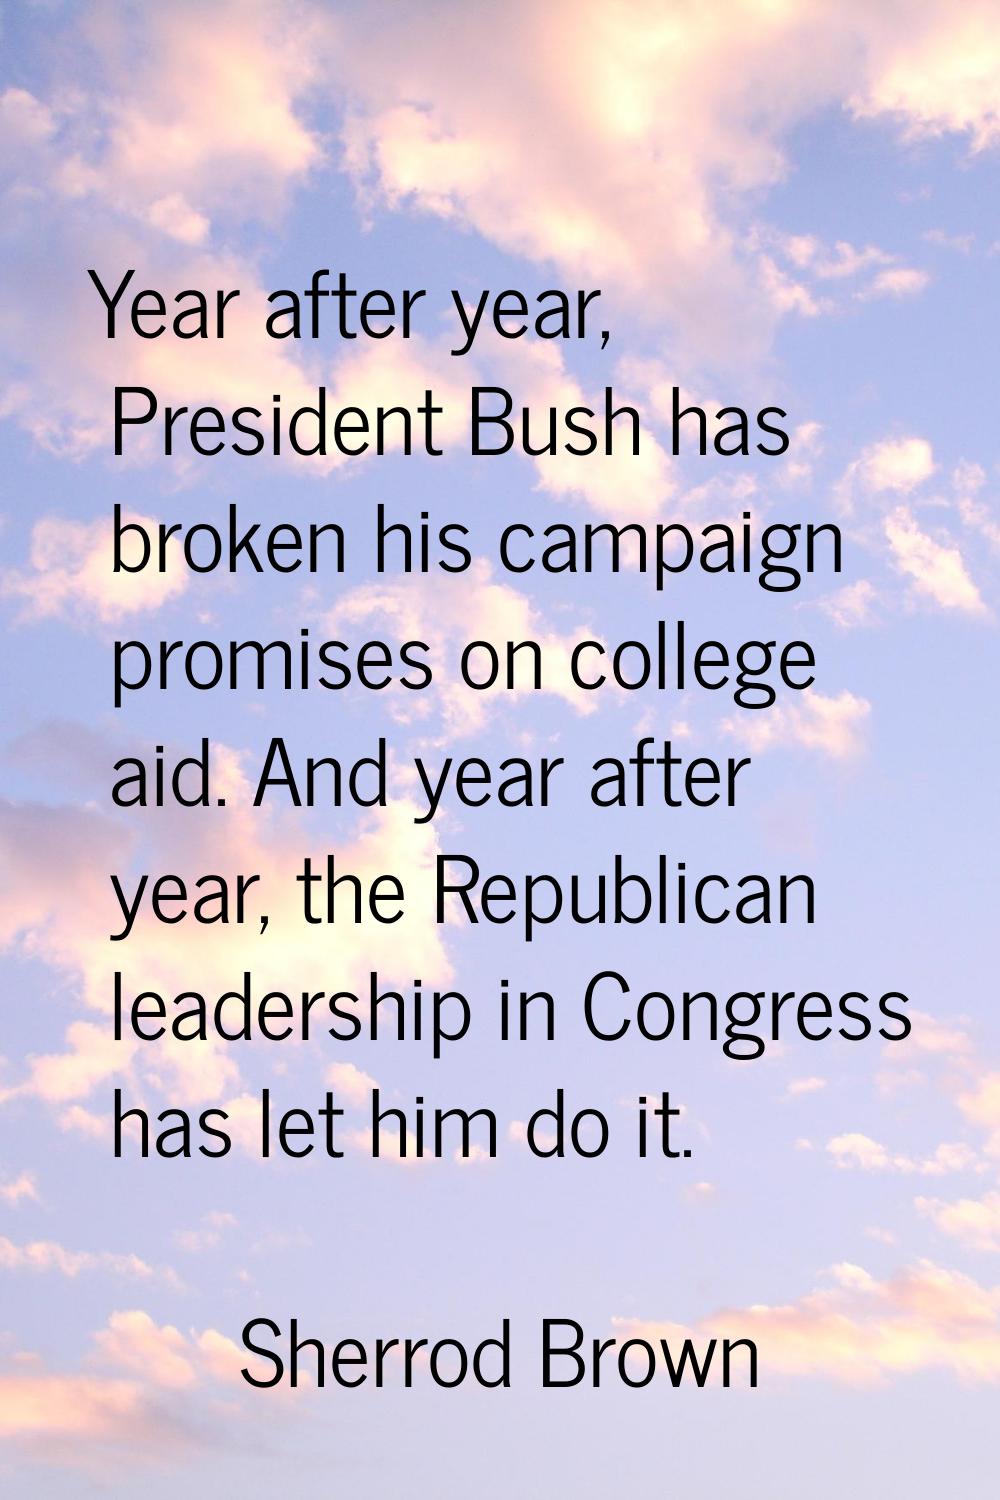 Year after year, President Bush has broken his campaign promises on college aid. And year after yea